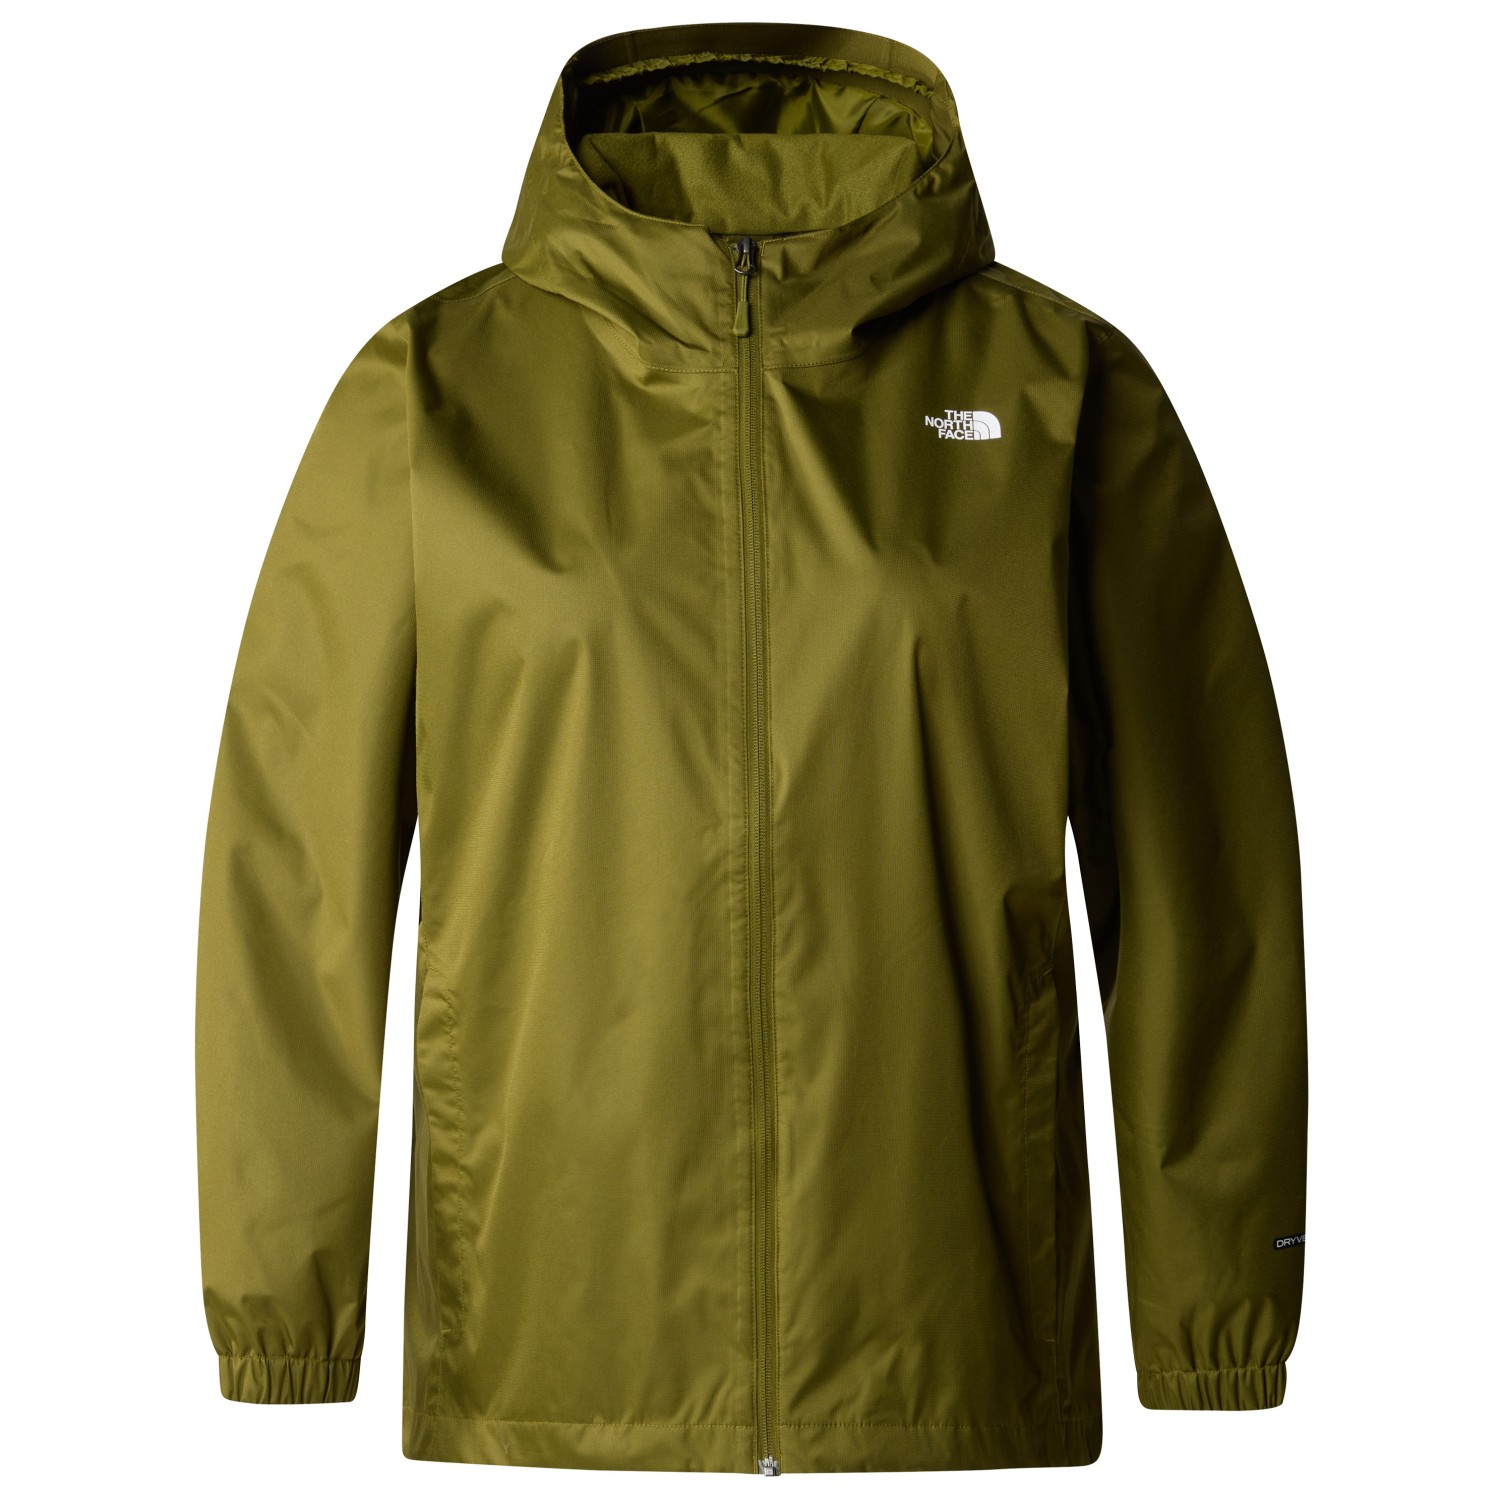 Дождевик The North Face Women's Quest Plus, цвет Forest Olive